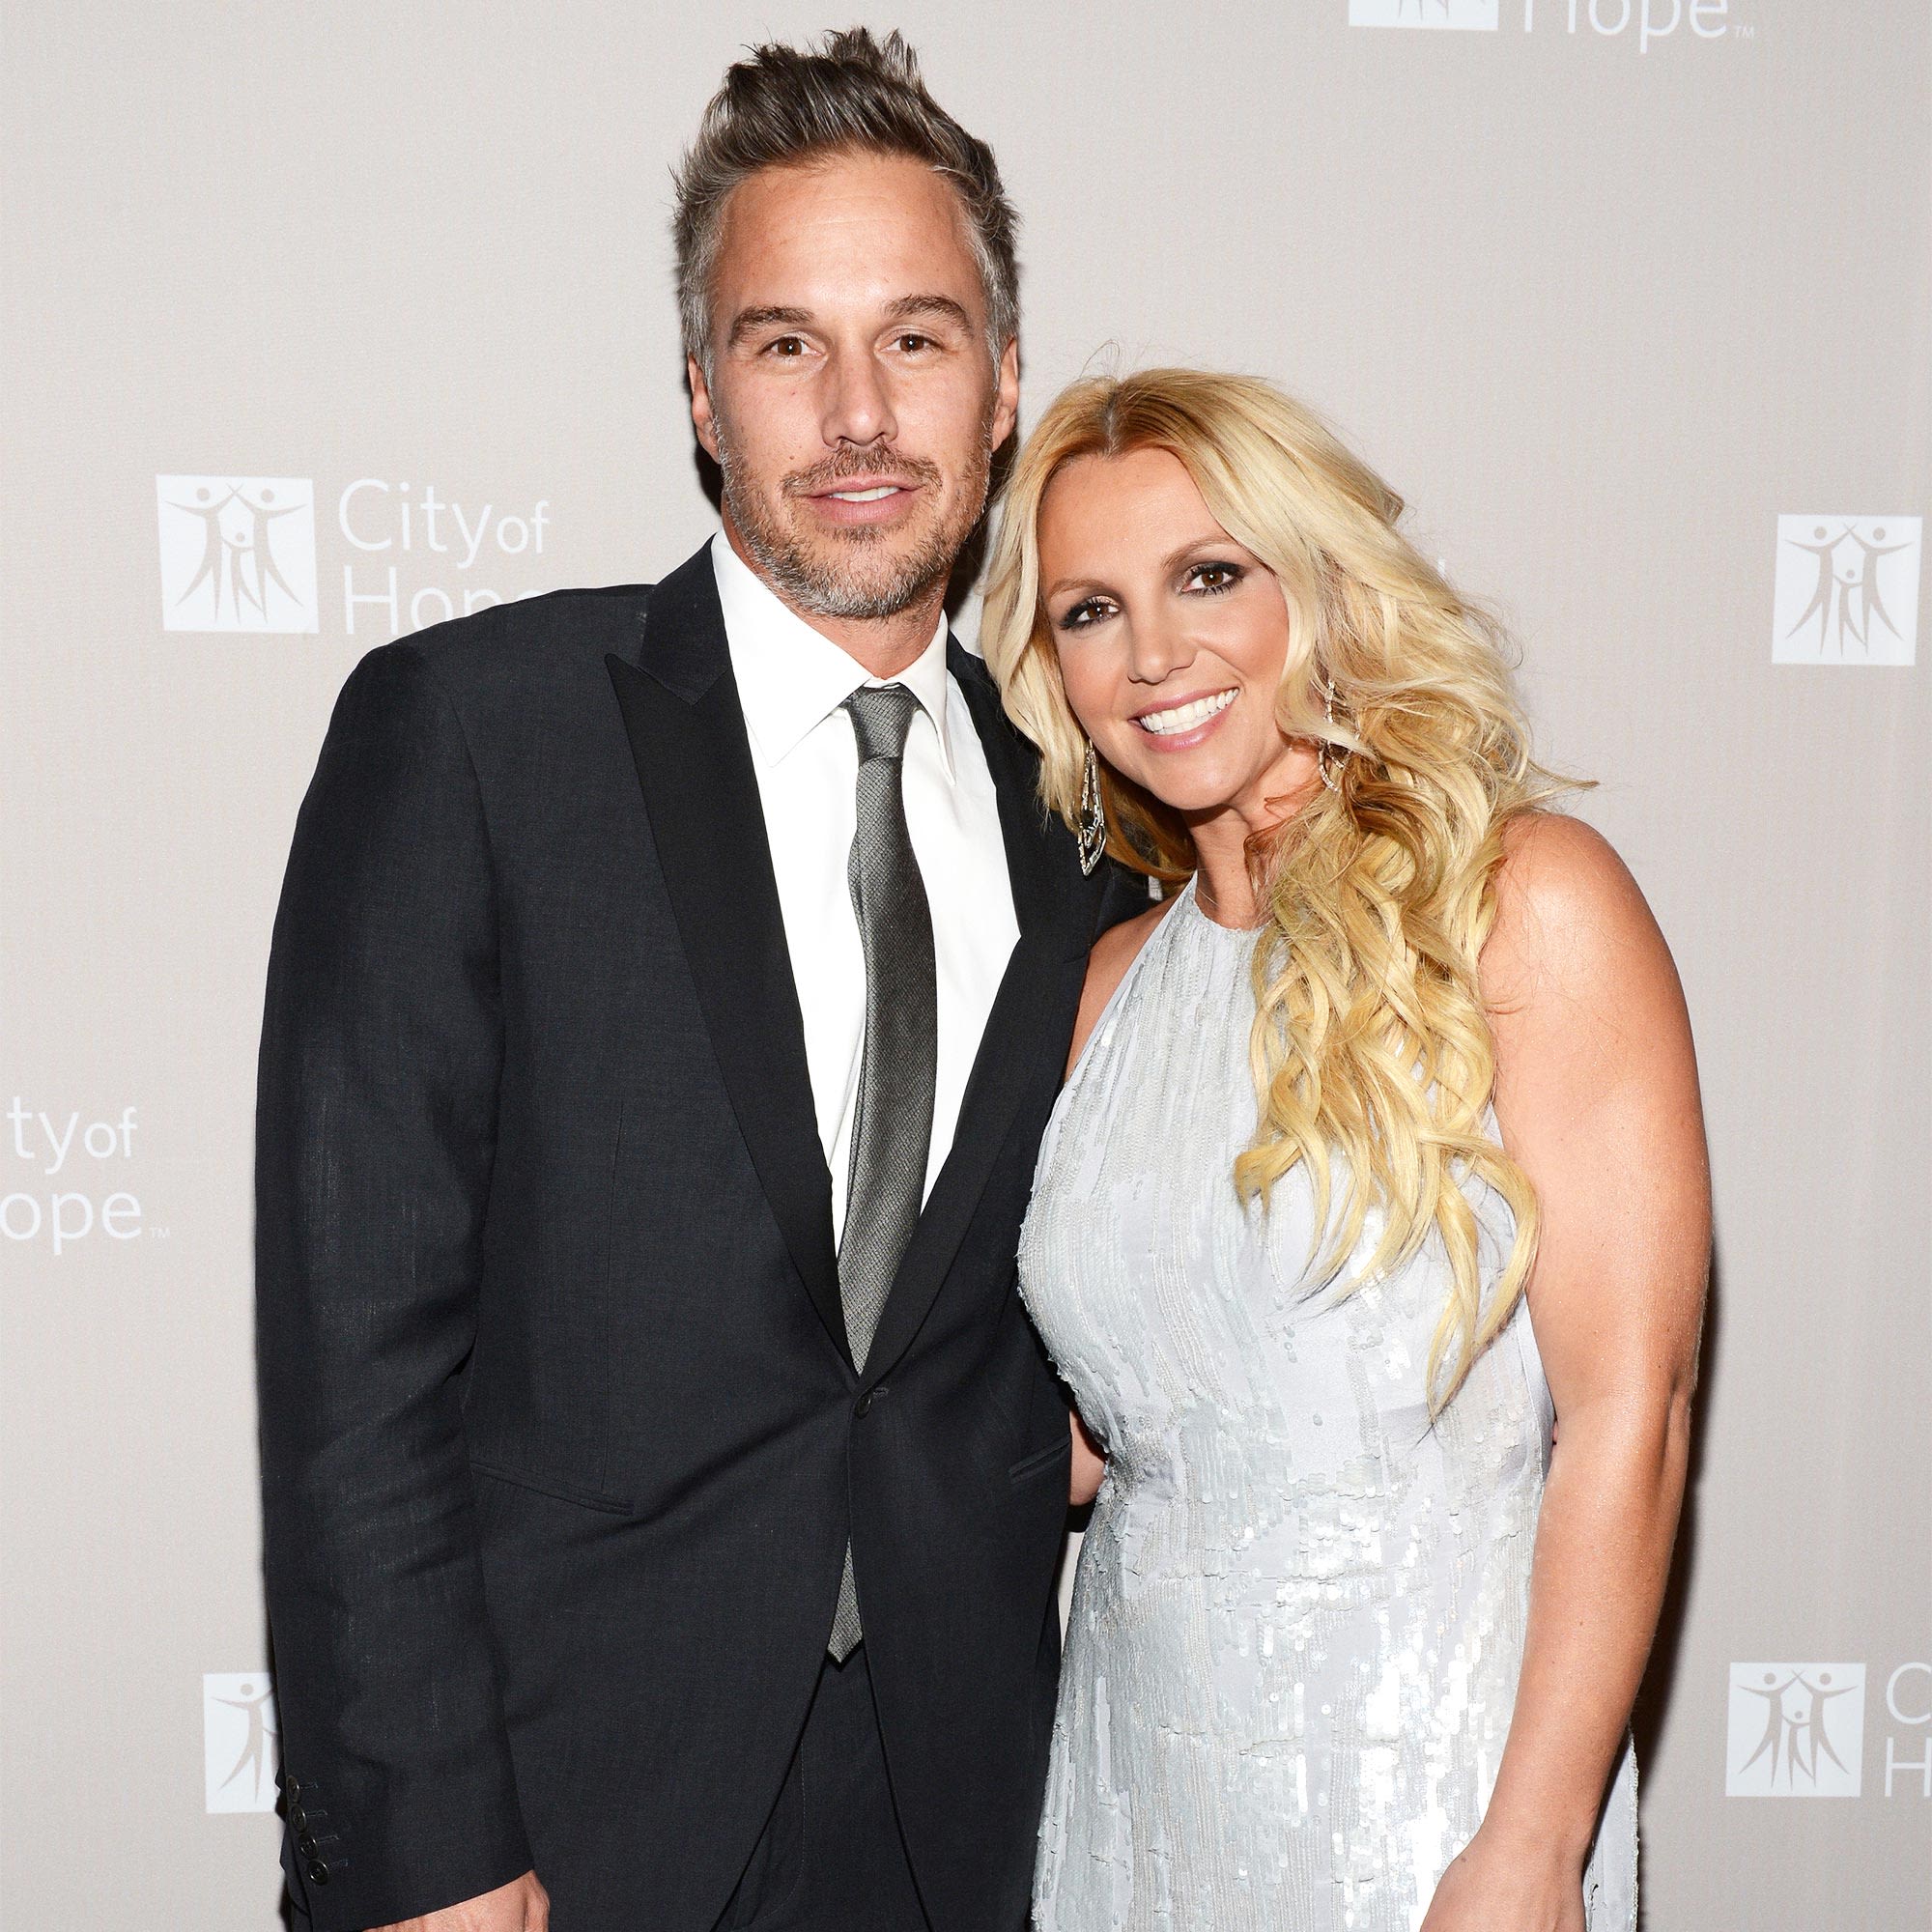 Britney Spears Hung Out with Ex-Fiancé Jason Trawick on Recent Vegas Trip: Source